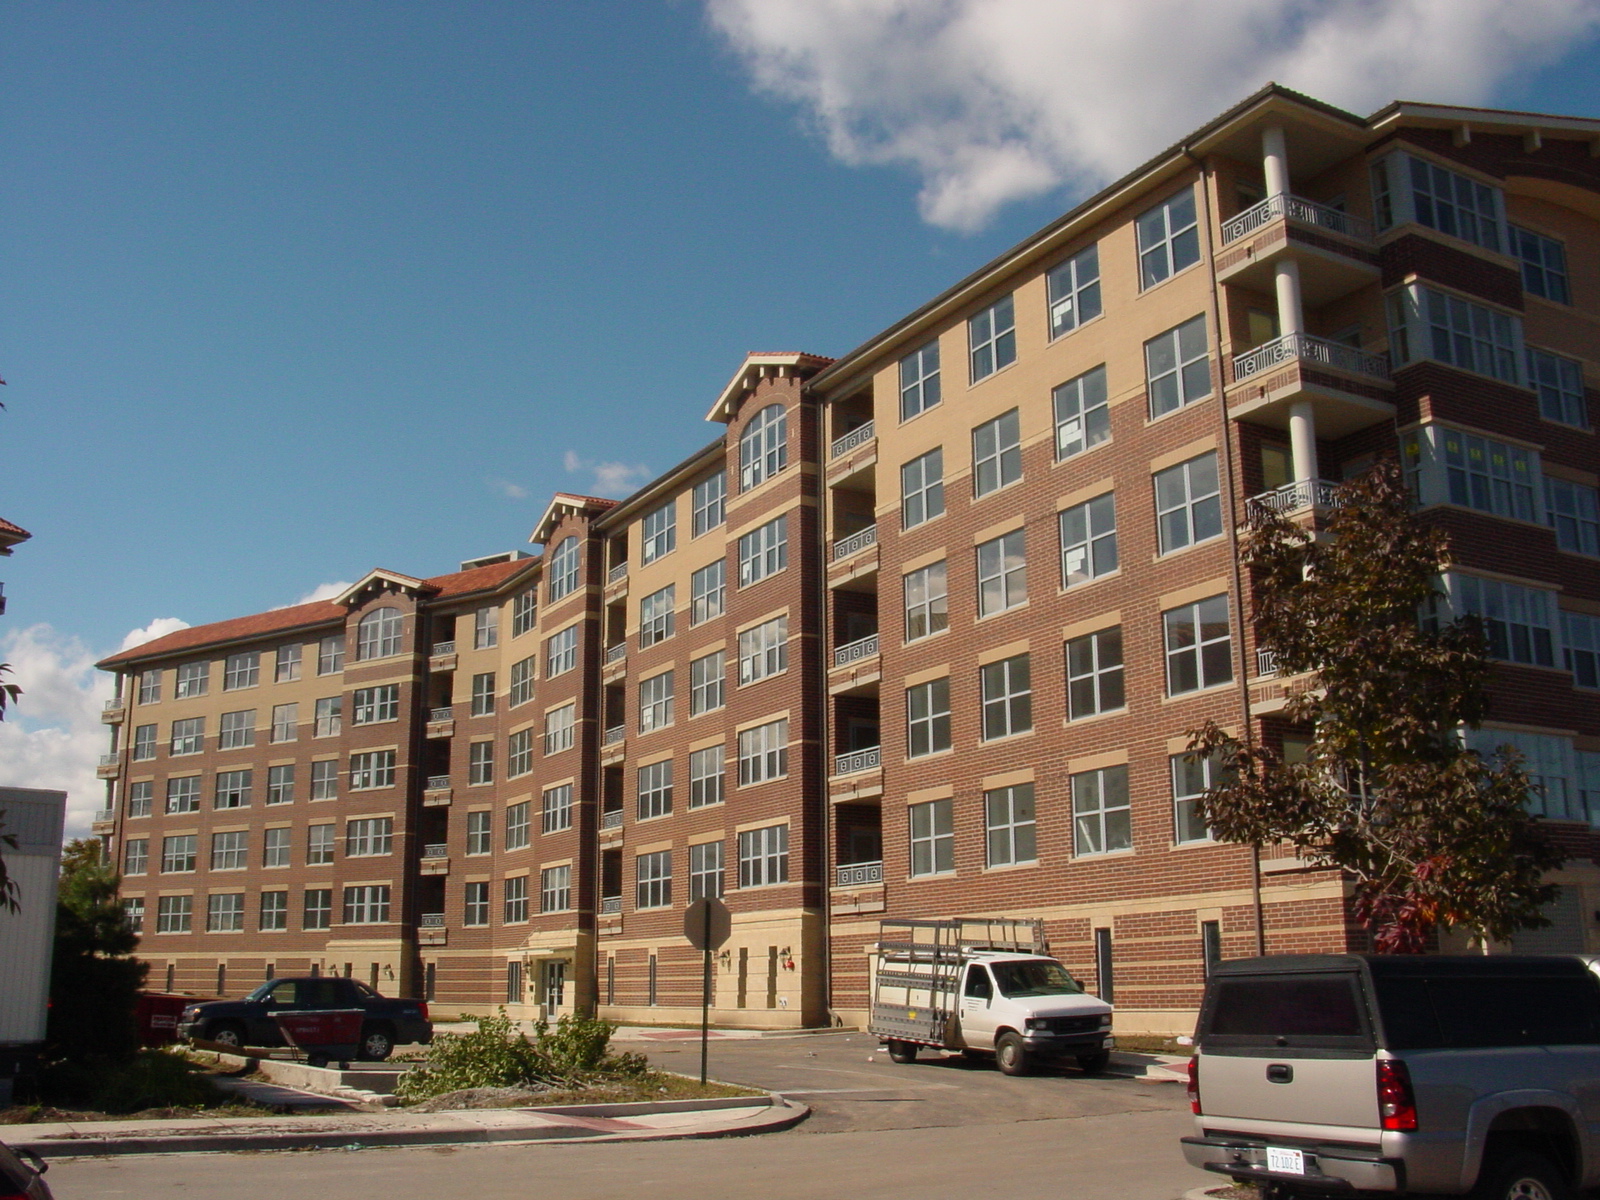 Two six story senior housing structures with parking in the basement. The structure consisted of exterior precast wall panels and brick load bearing walls, interior steel frames and hollow-core precast plank floors. The structure was supported on deep caisson foundations.